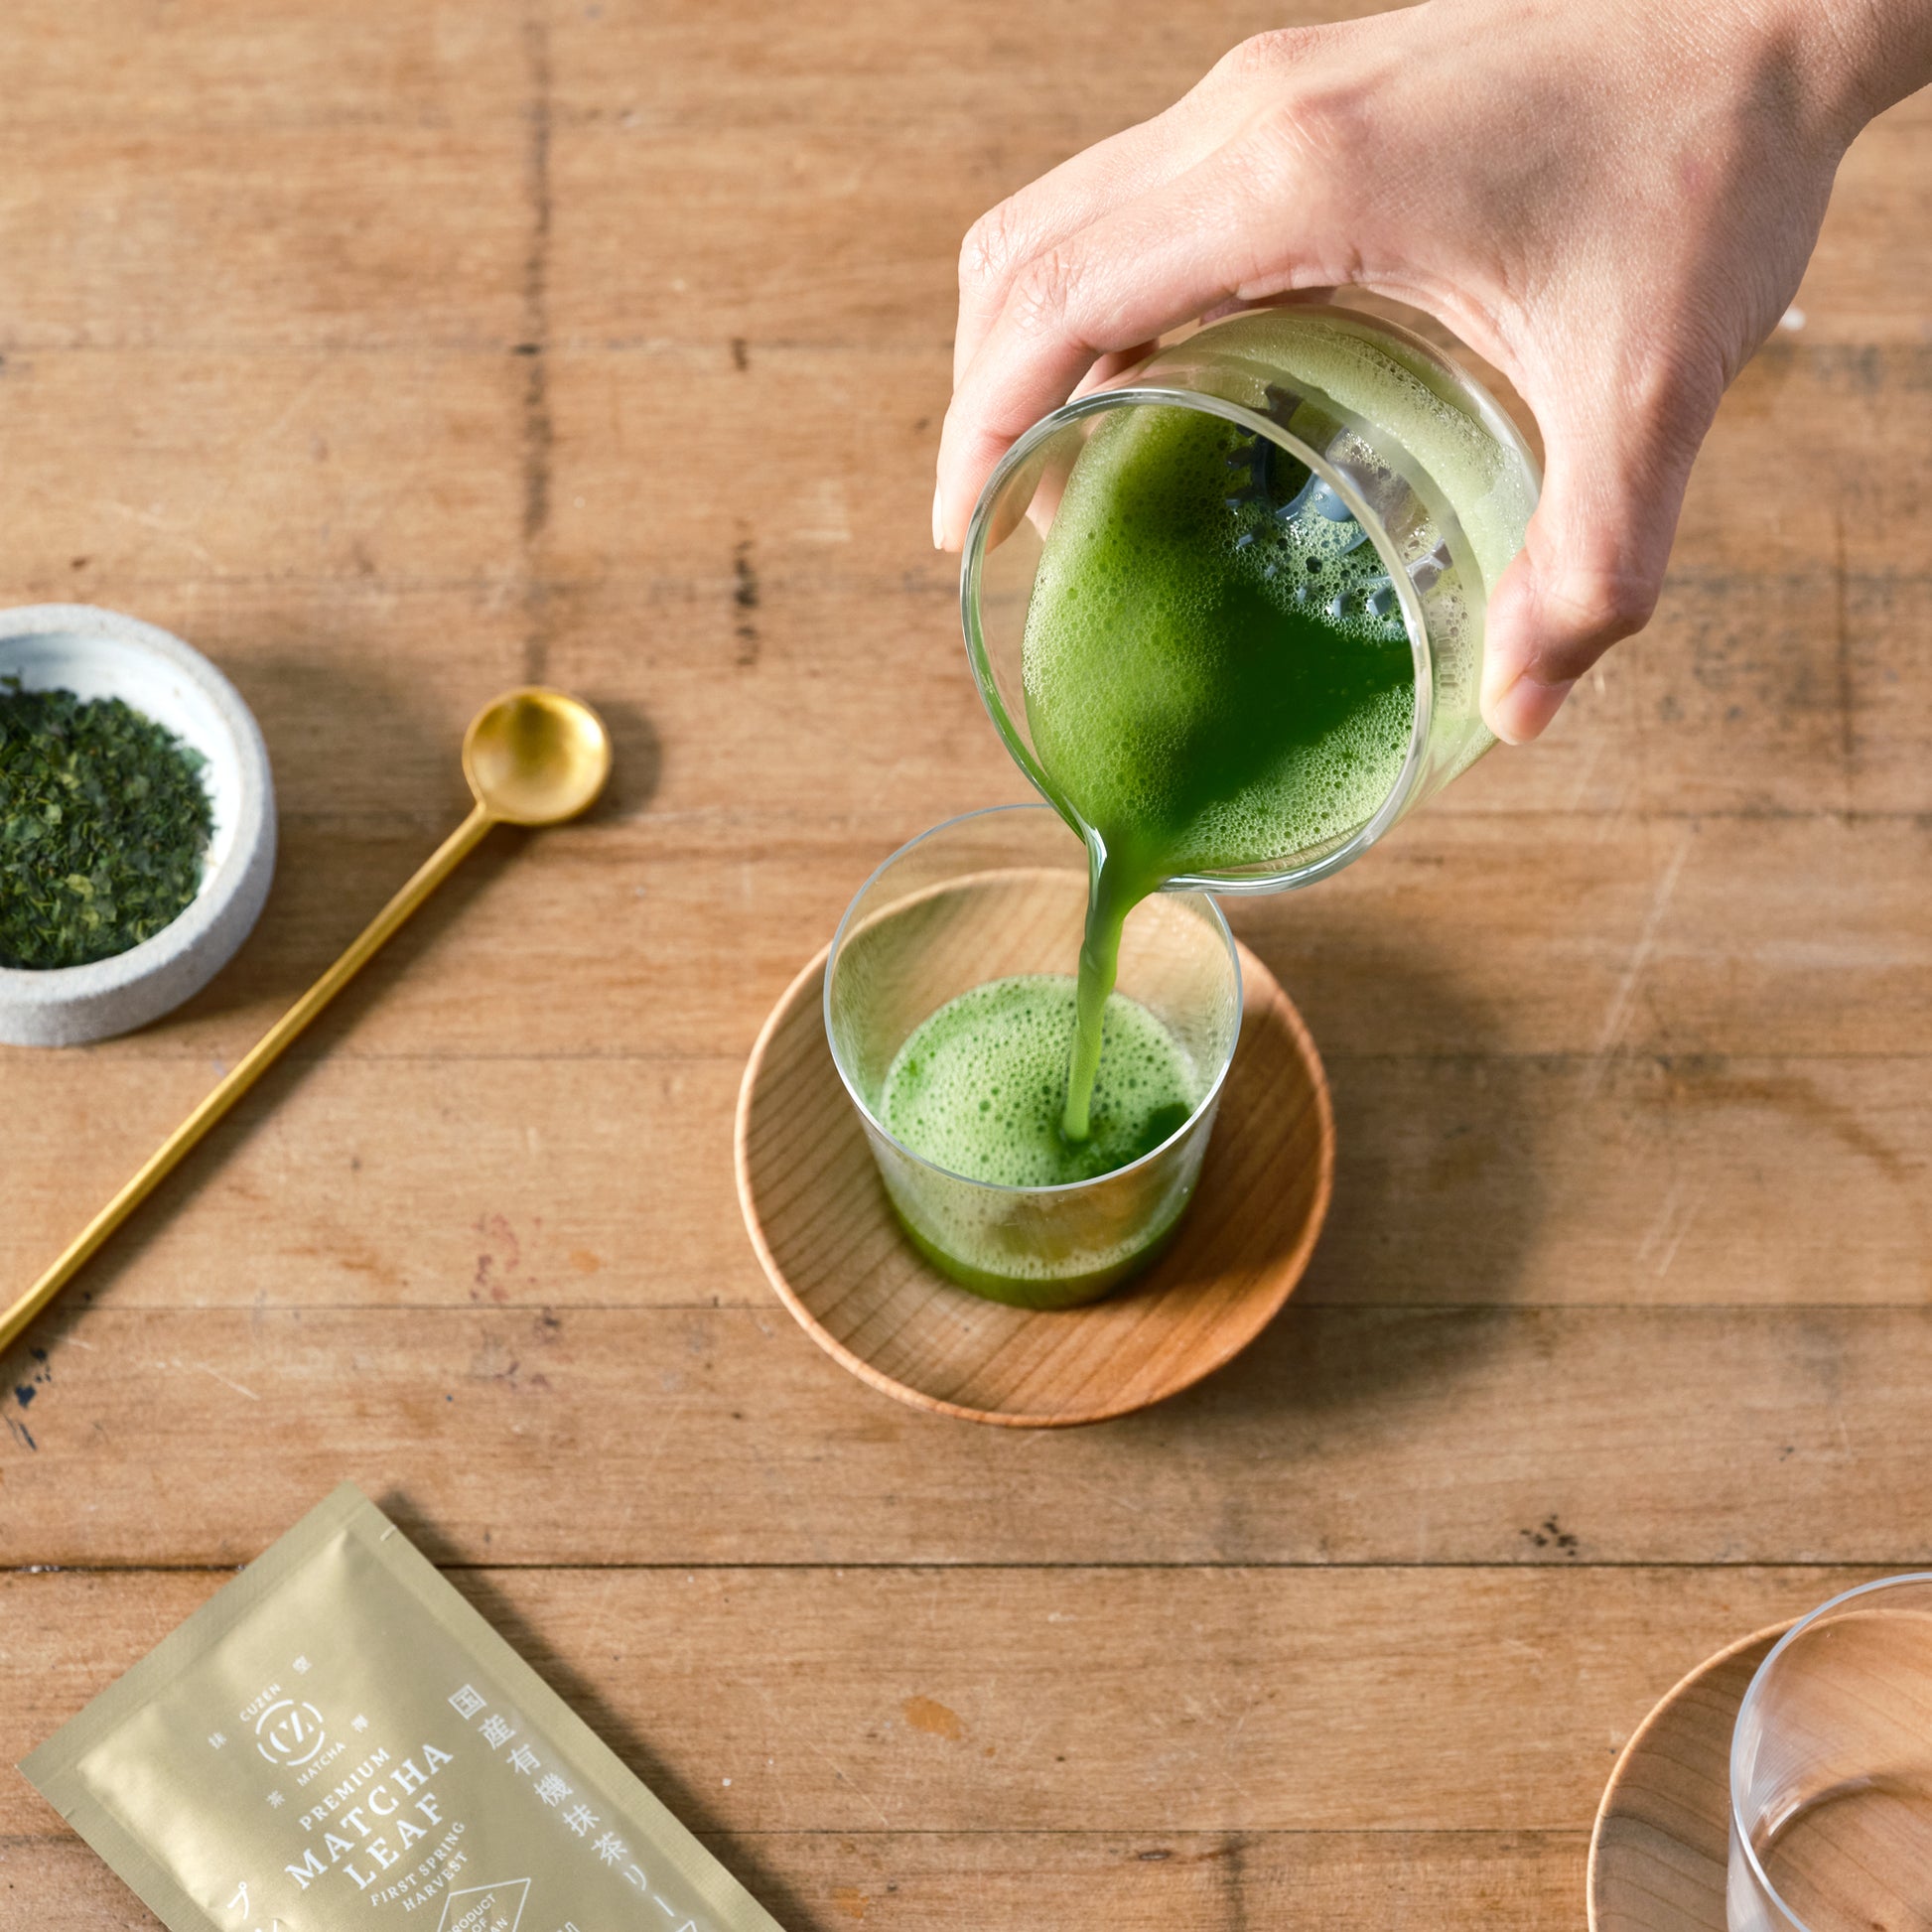 A shot of bright green matcha is poured from the whisking cup into our Matcha Shot Glass, which is set on a Wooden Saucer.